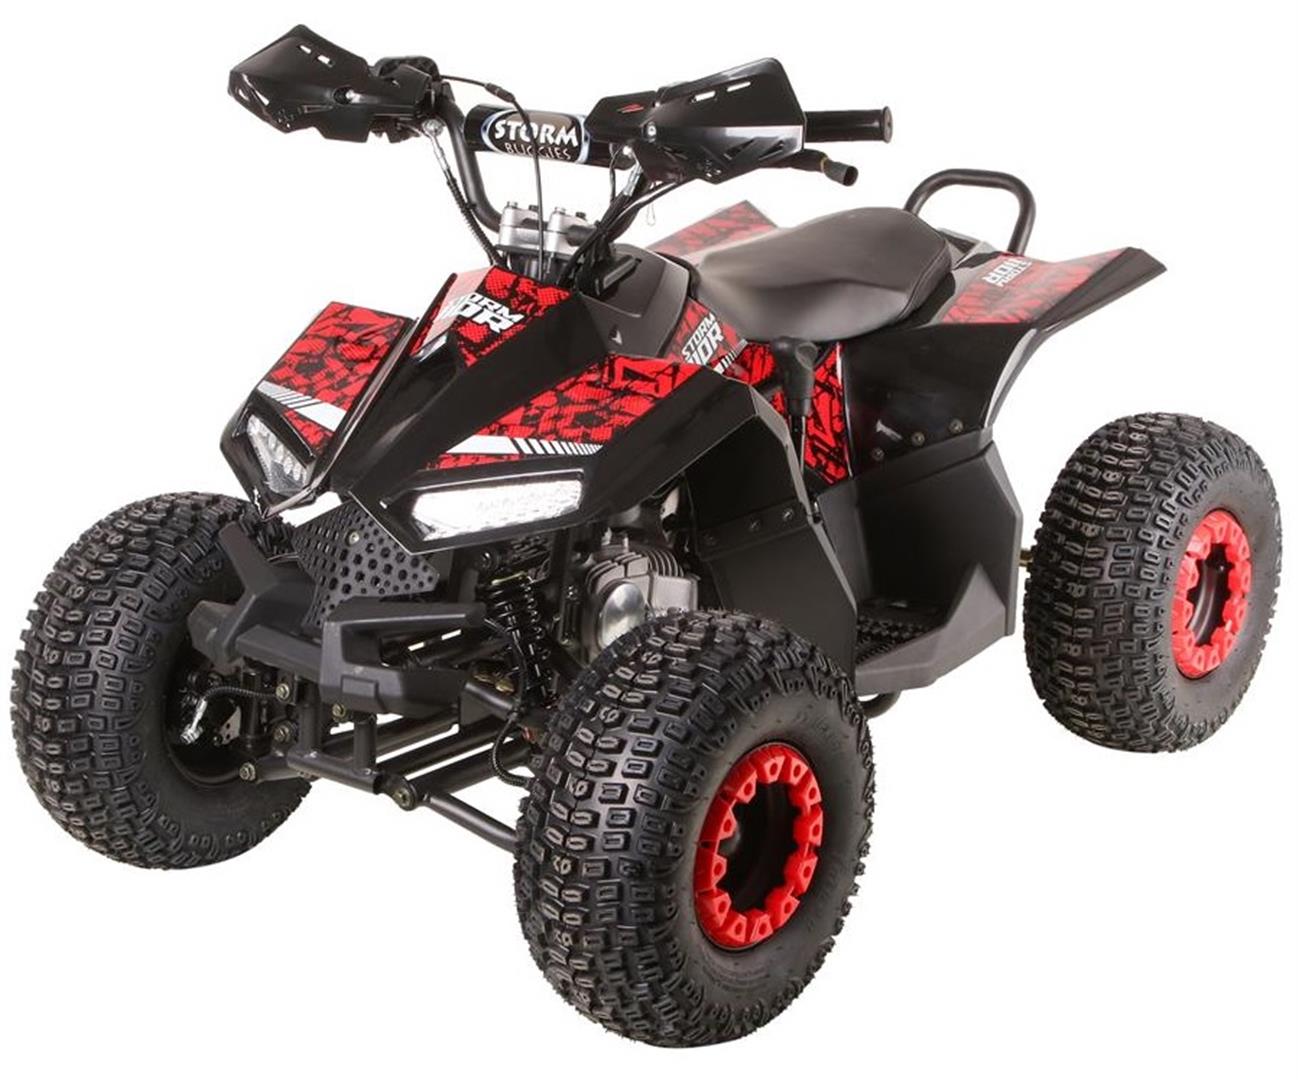 Storm 110R Kids Quad Bike With Reverse - Red